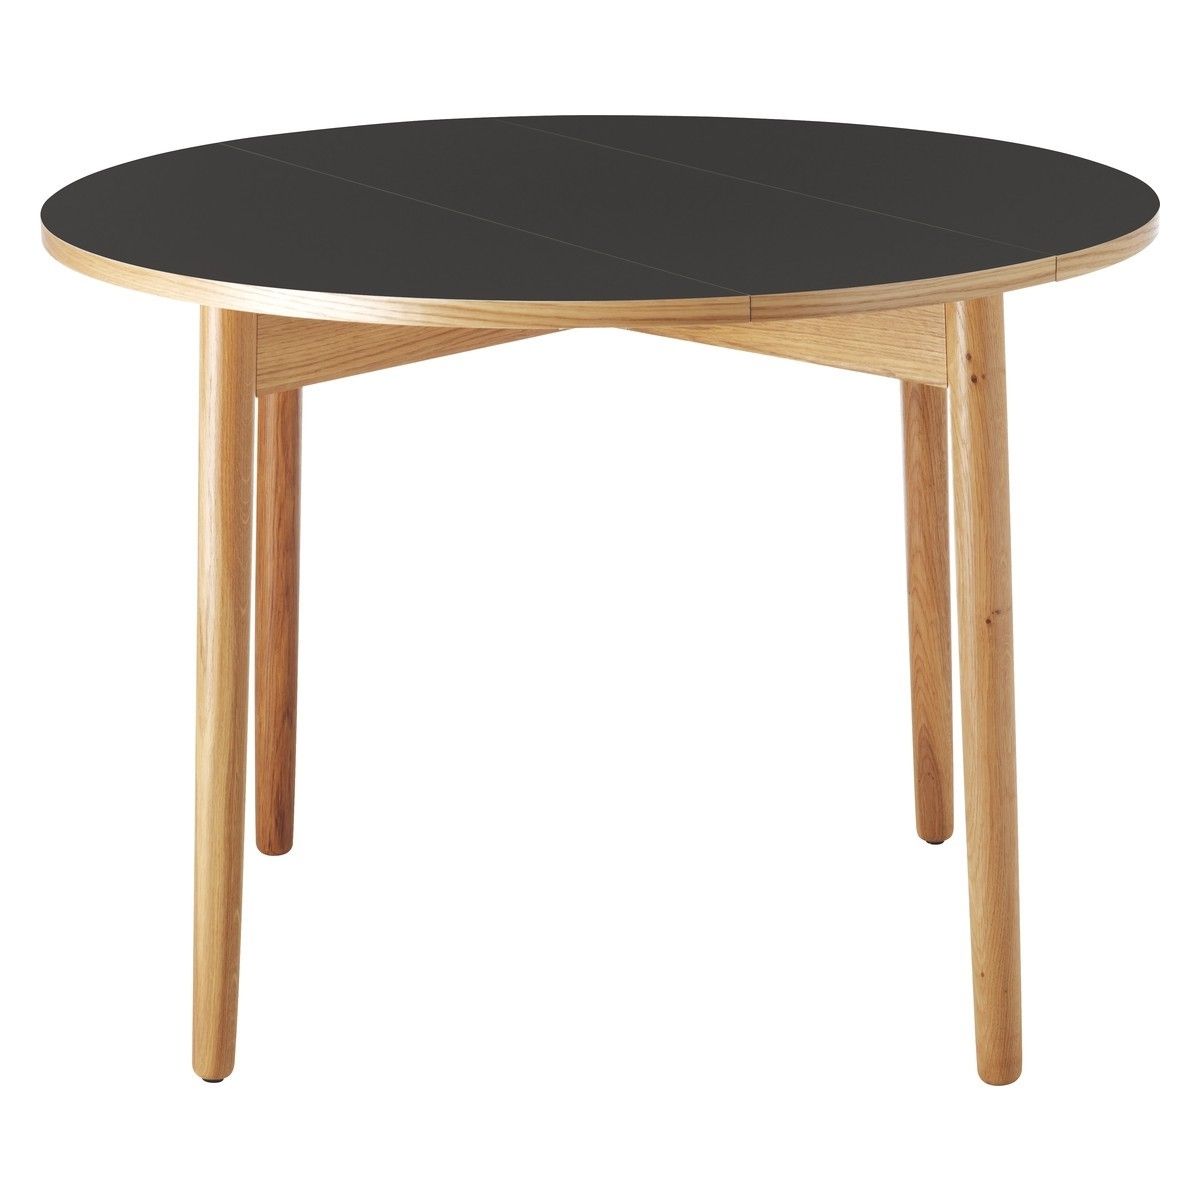 Latest Dining Tables. Outstanding Black Round Dining Table: Black Round For Caira Black Round Dining Tables (Photo 5 of 25)